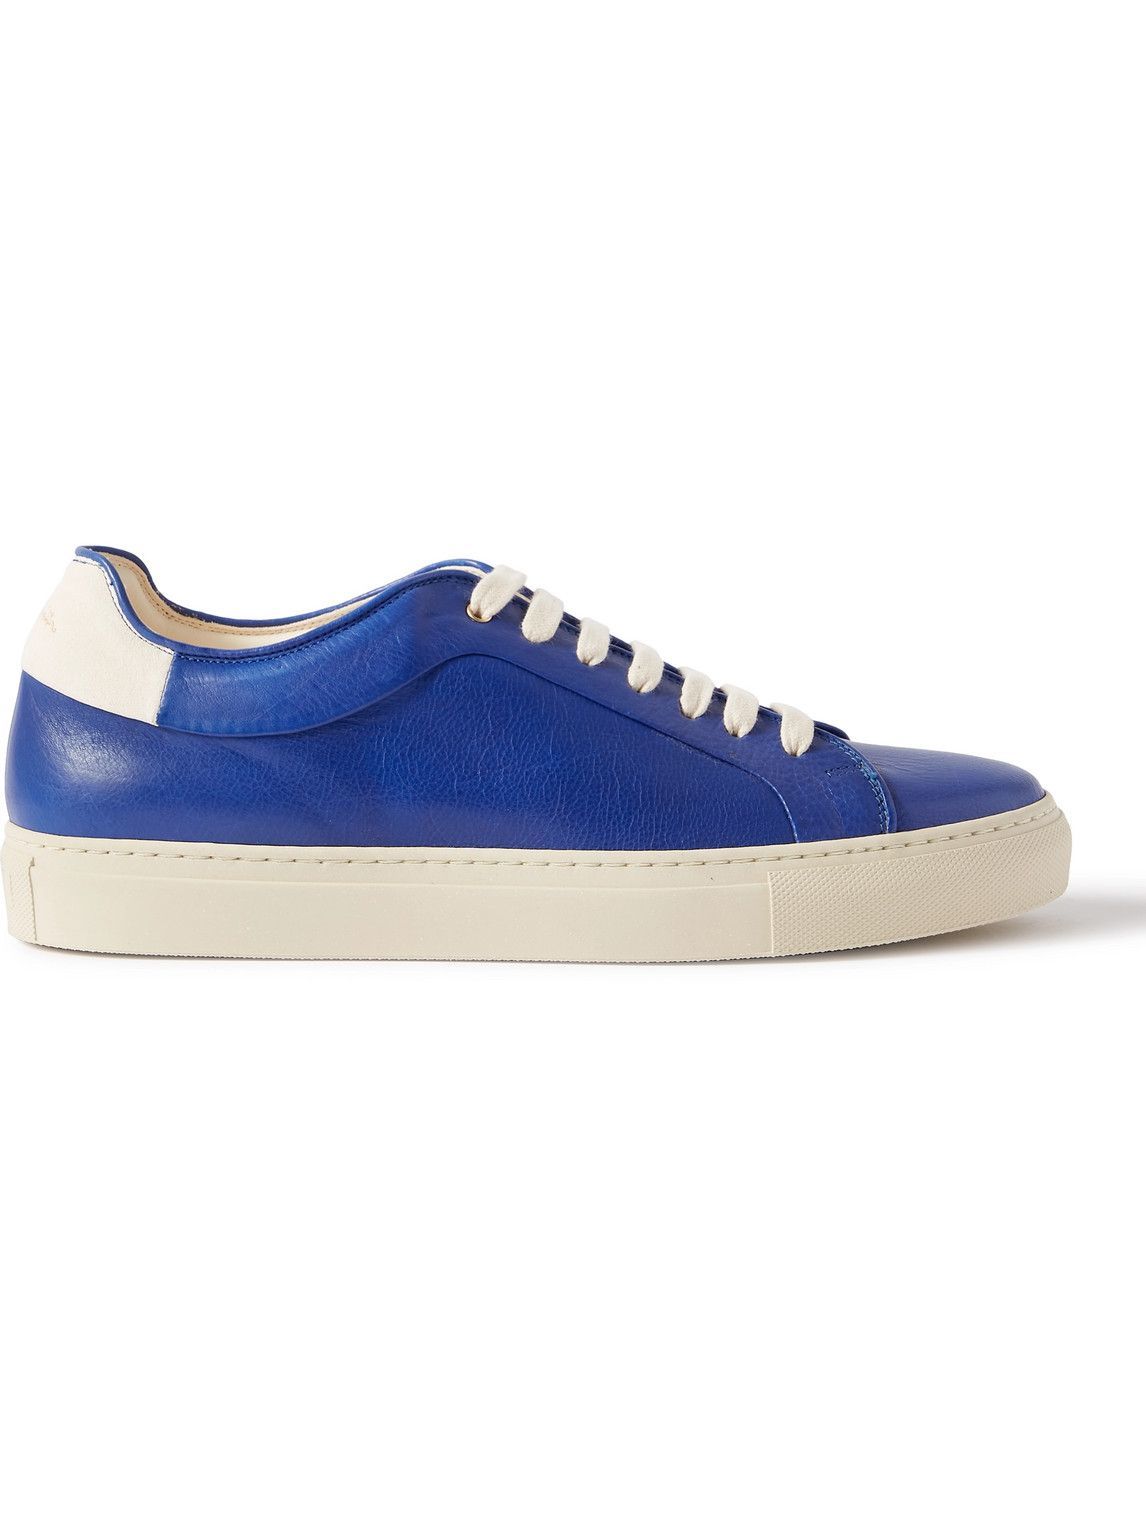 Paul Smith - Basso Leather Sneakers - Blue Paul Smith